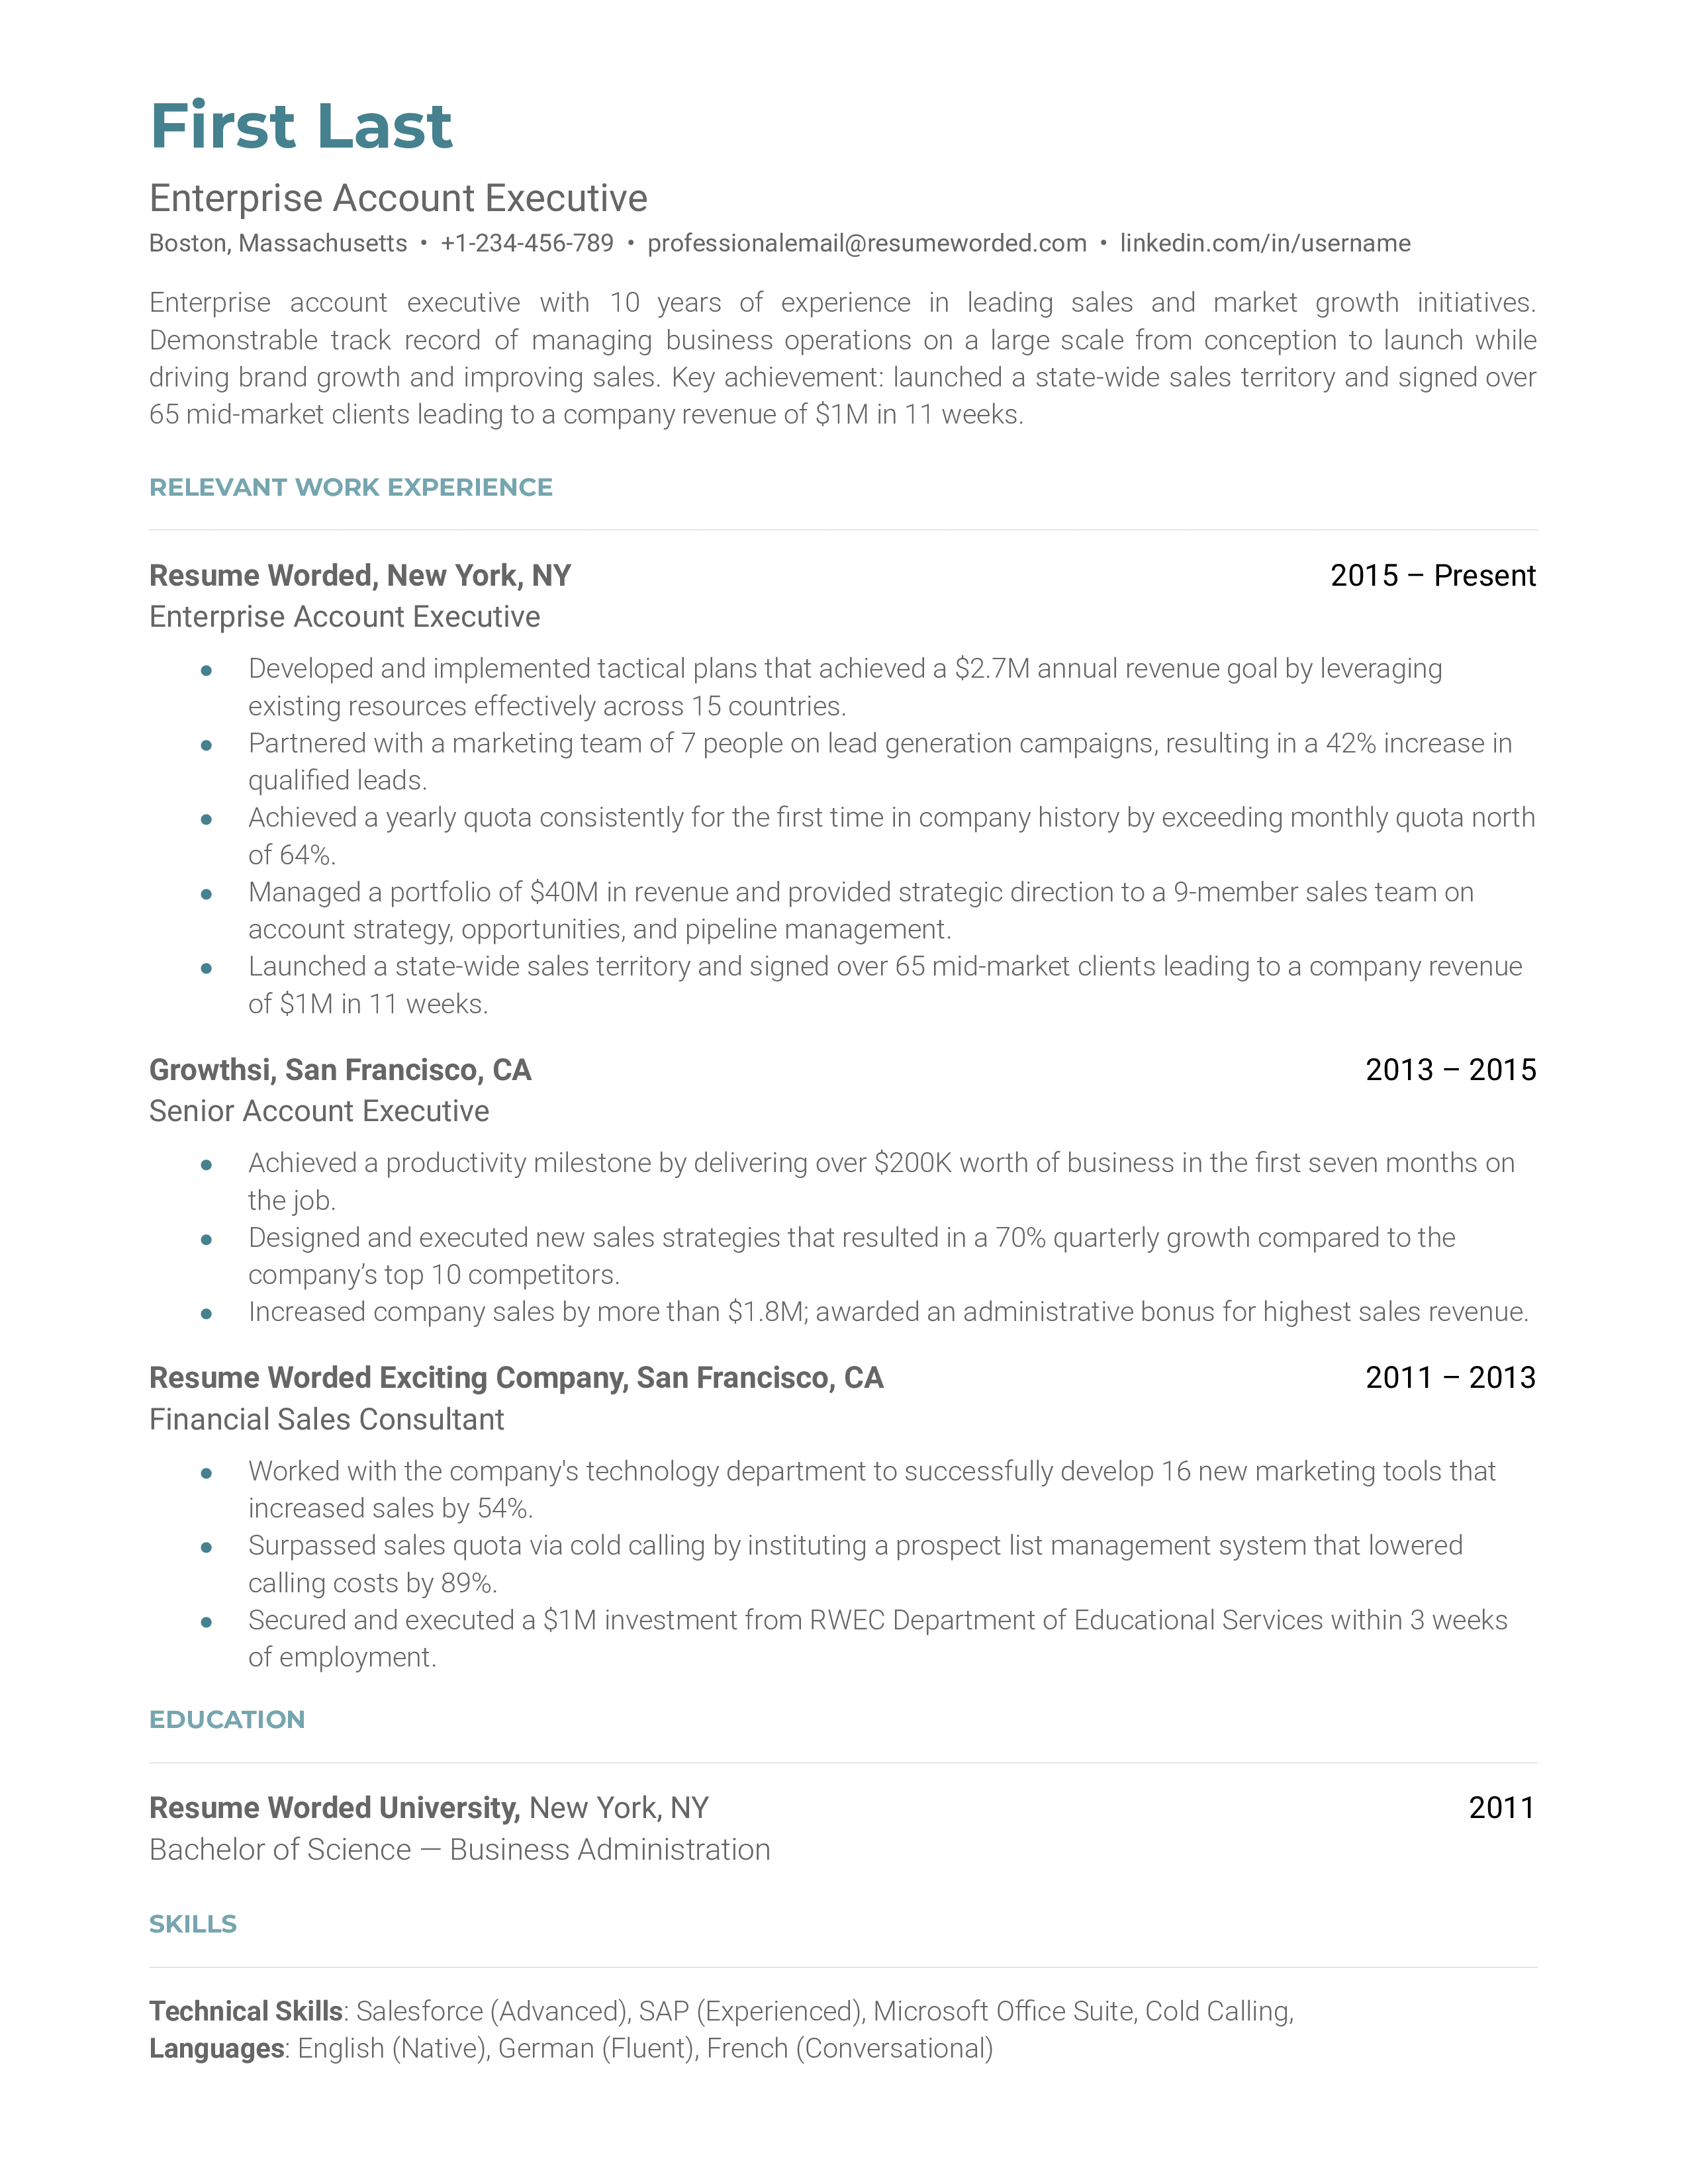 A CV for an Enterprise Account Executive featuring sales achievements and technical understanding.